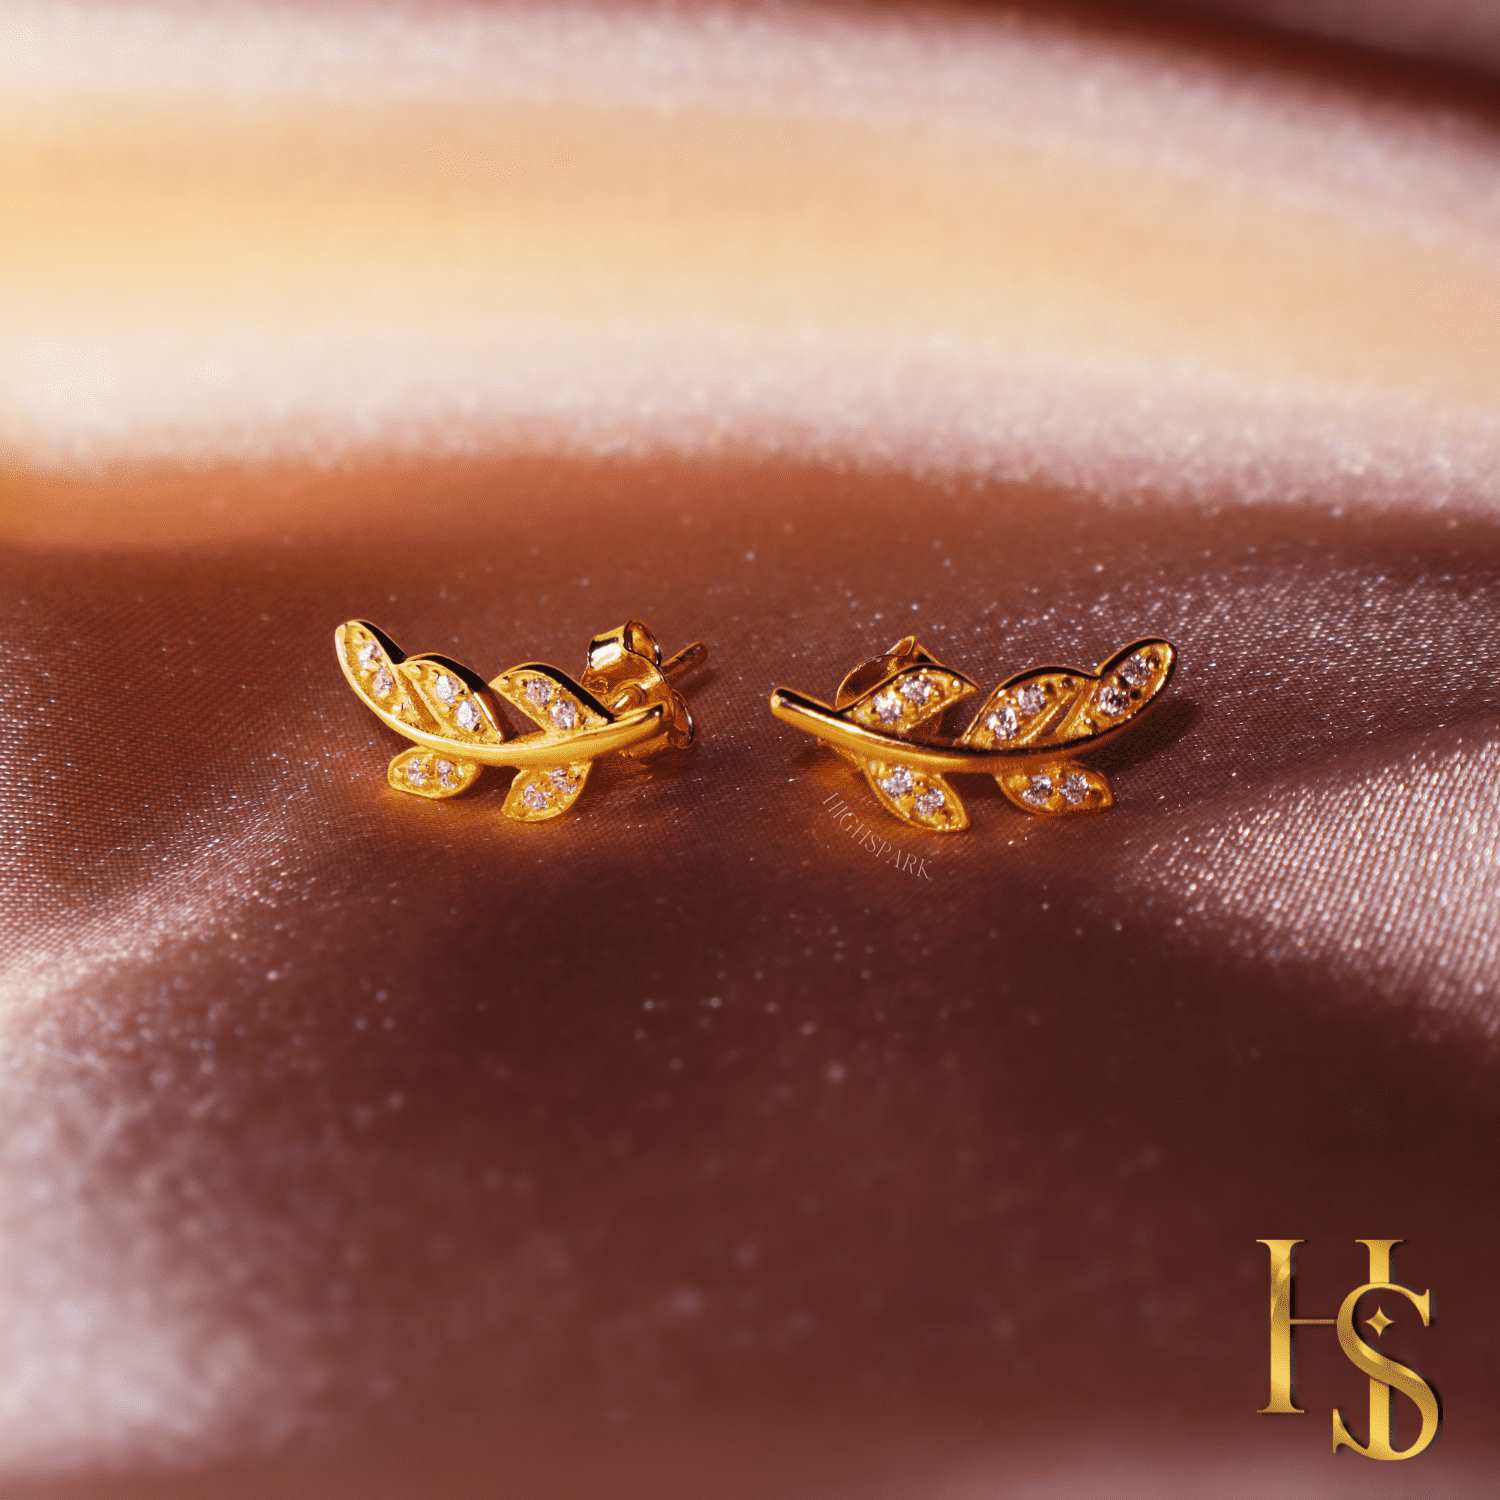 Minimal Gold Leaf Earrings in 92.5 Silver studded with Swiss Zirconia - 18K Gold Finish